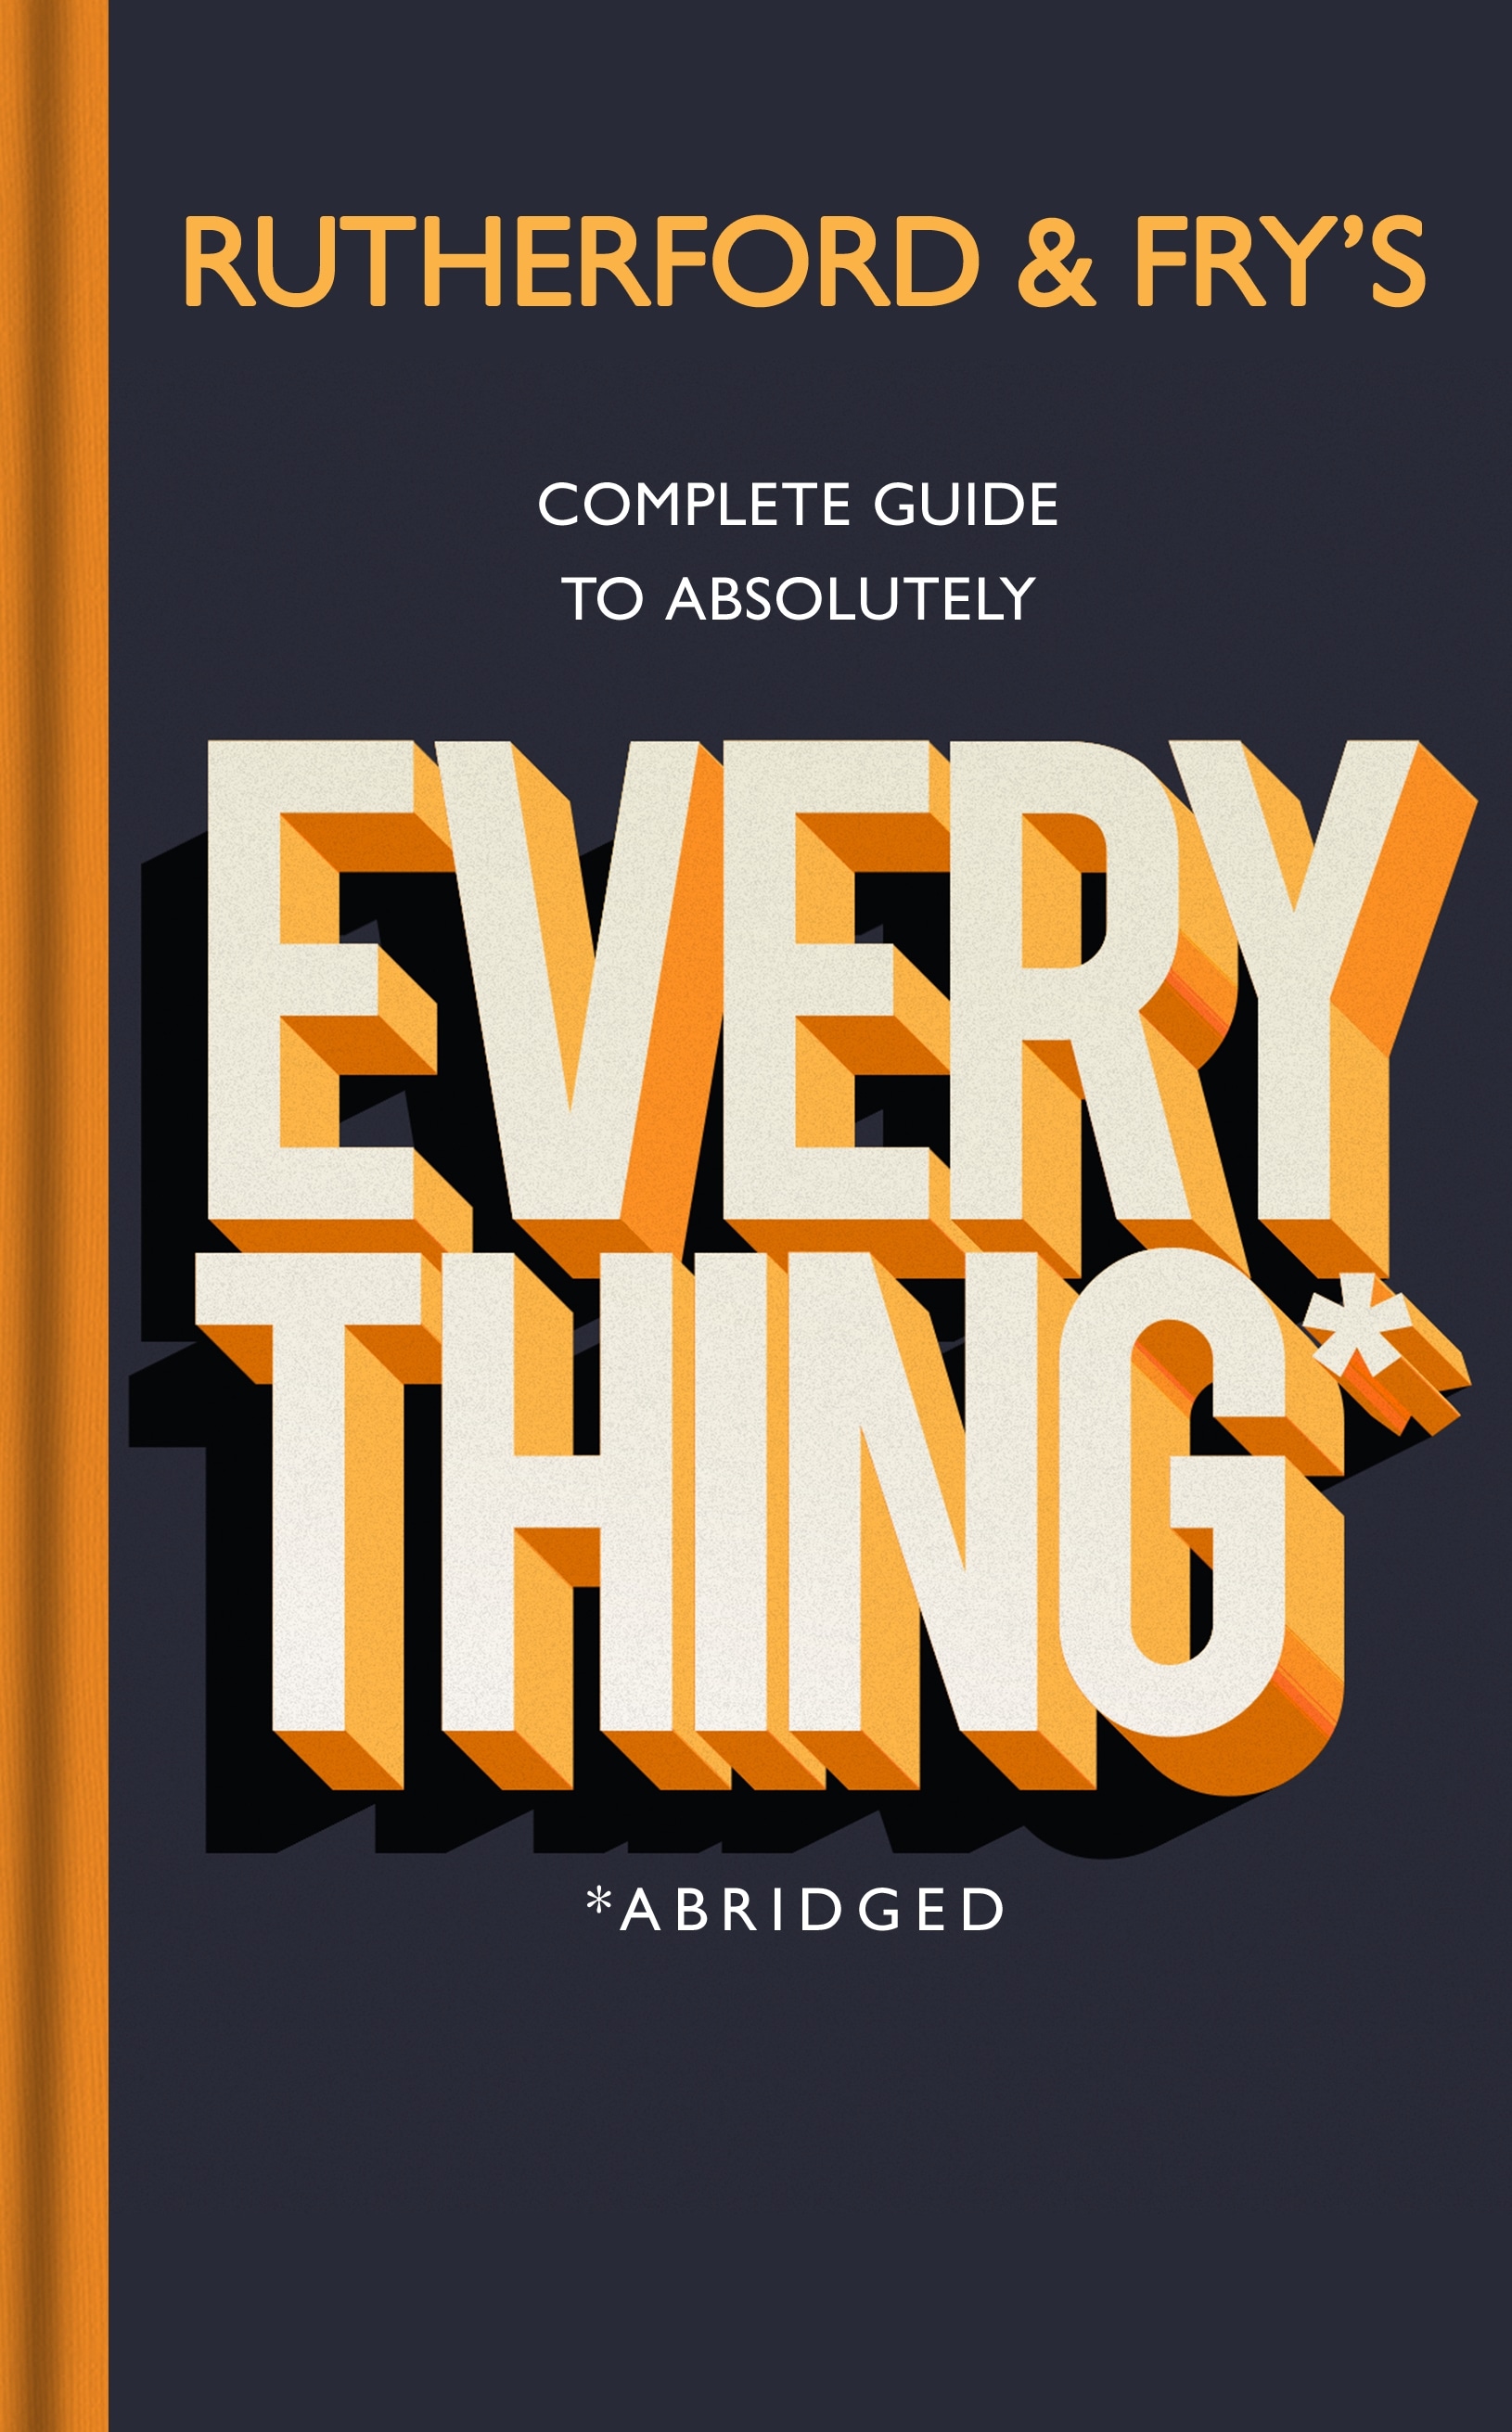 Book “Rutherford and Fry’s Complete Guide to Absolutely Everything (Abridged)” by Adam Rutherford, Hannah Fry — October 7, 2021